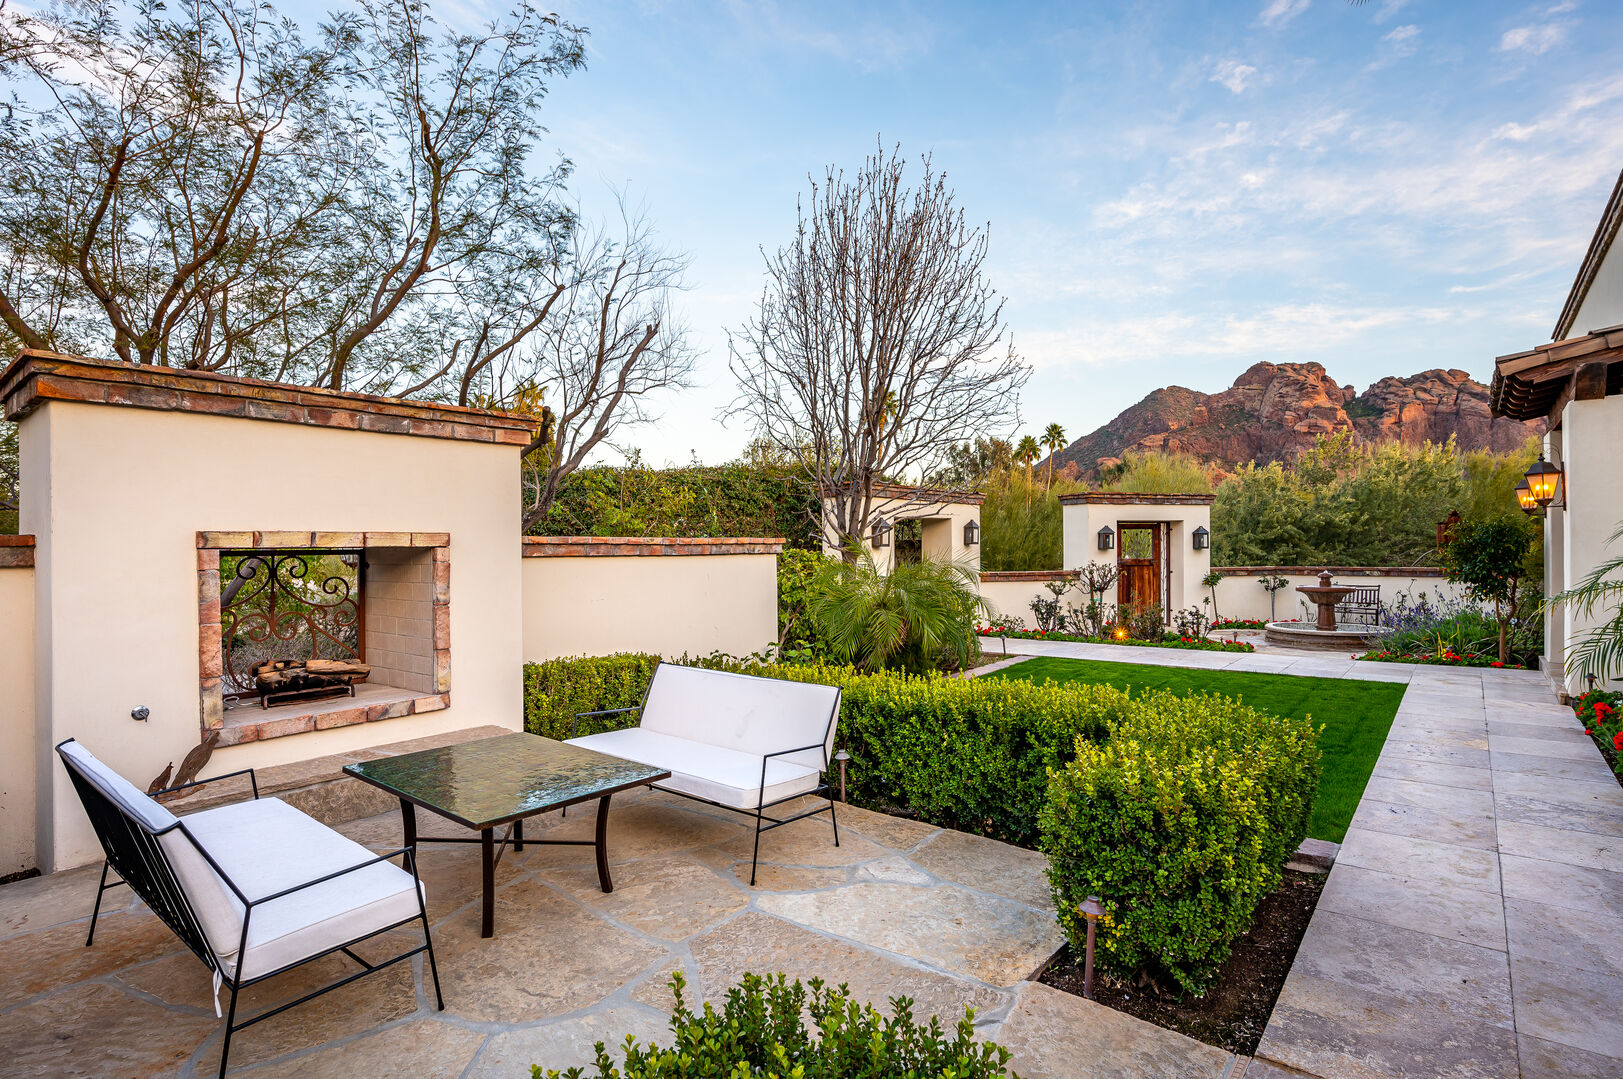 Outside fireplace and seating with views of Camelback Mountain.